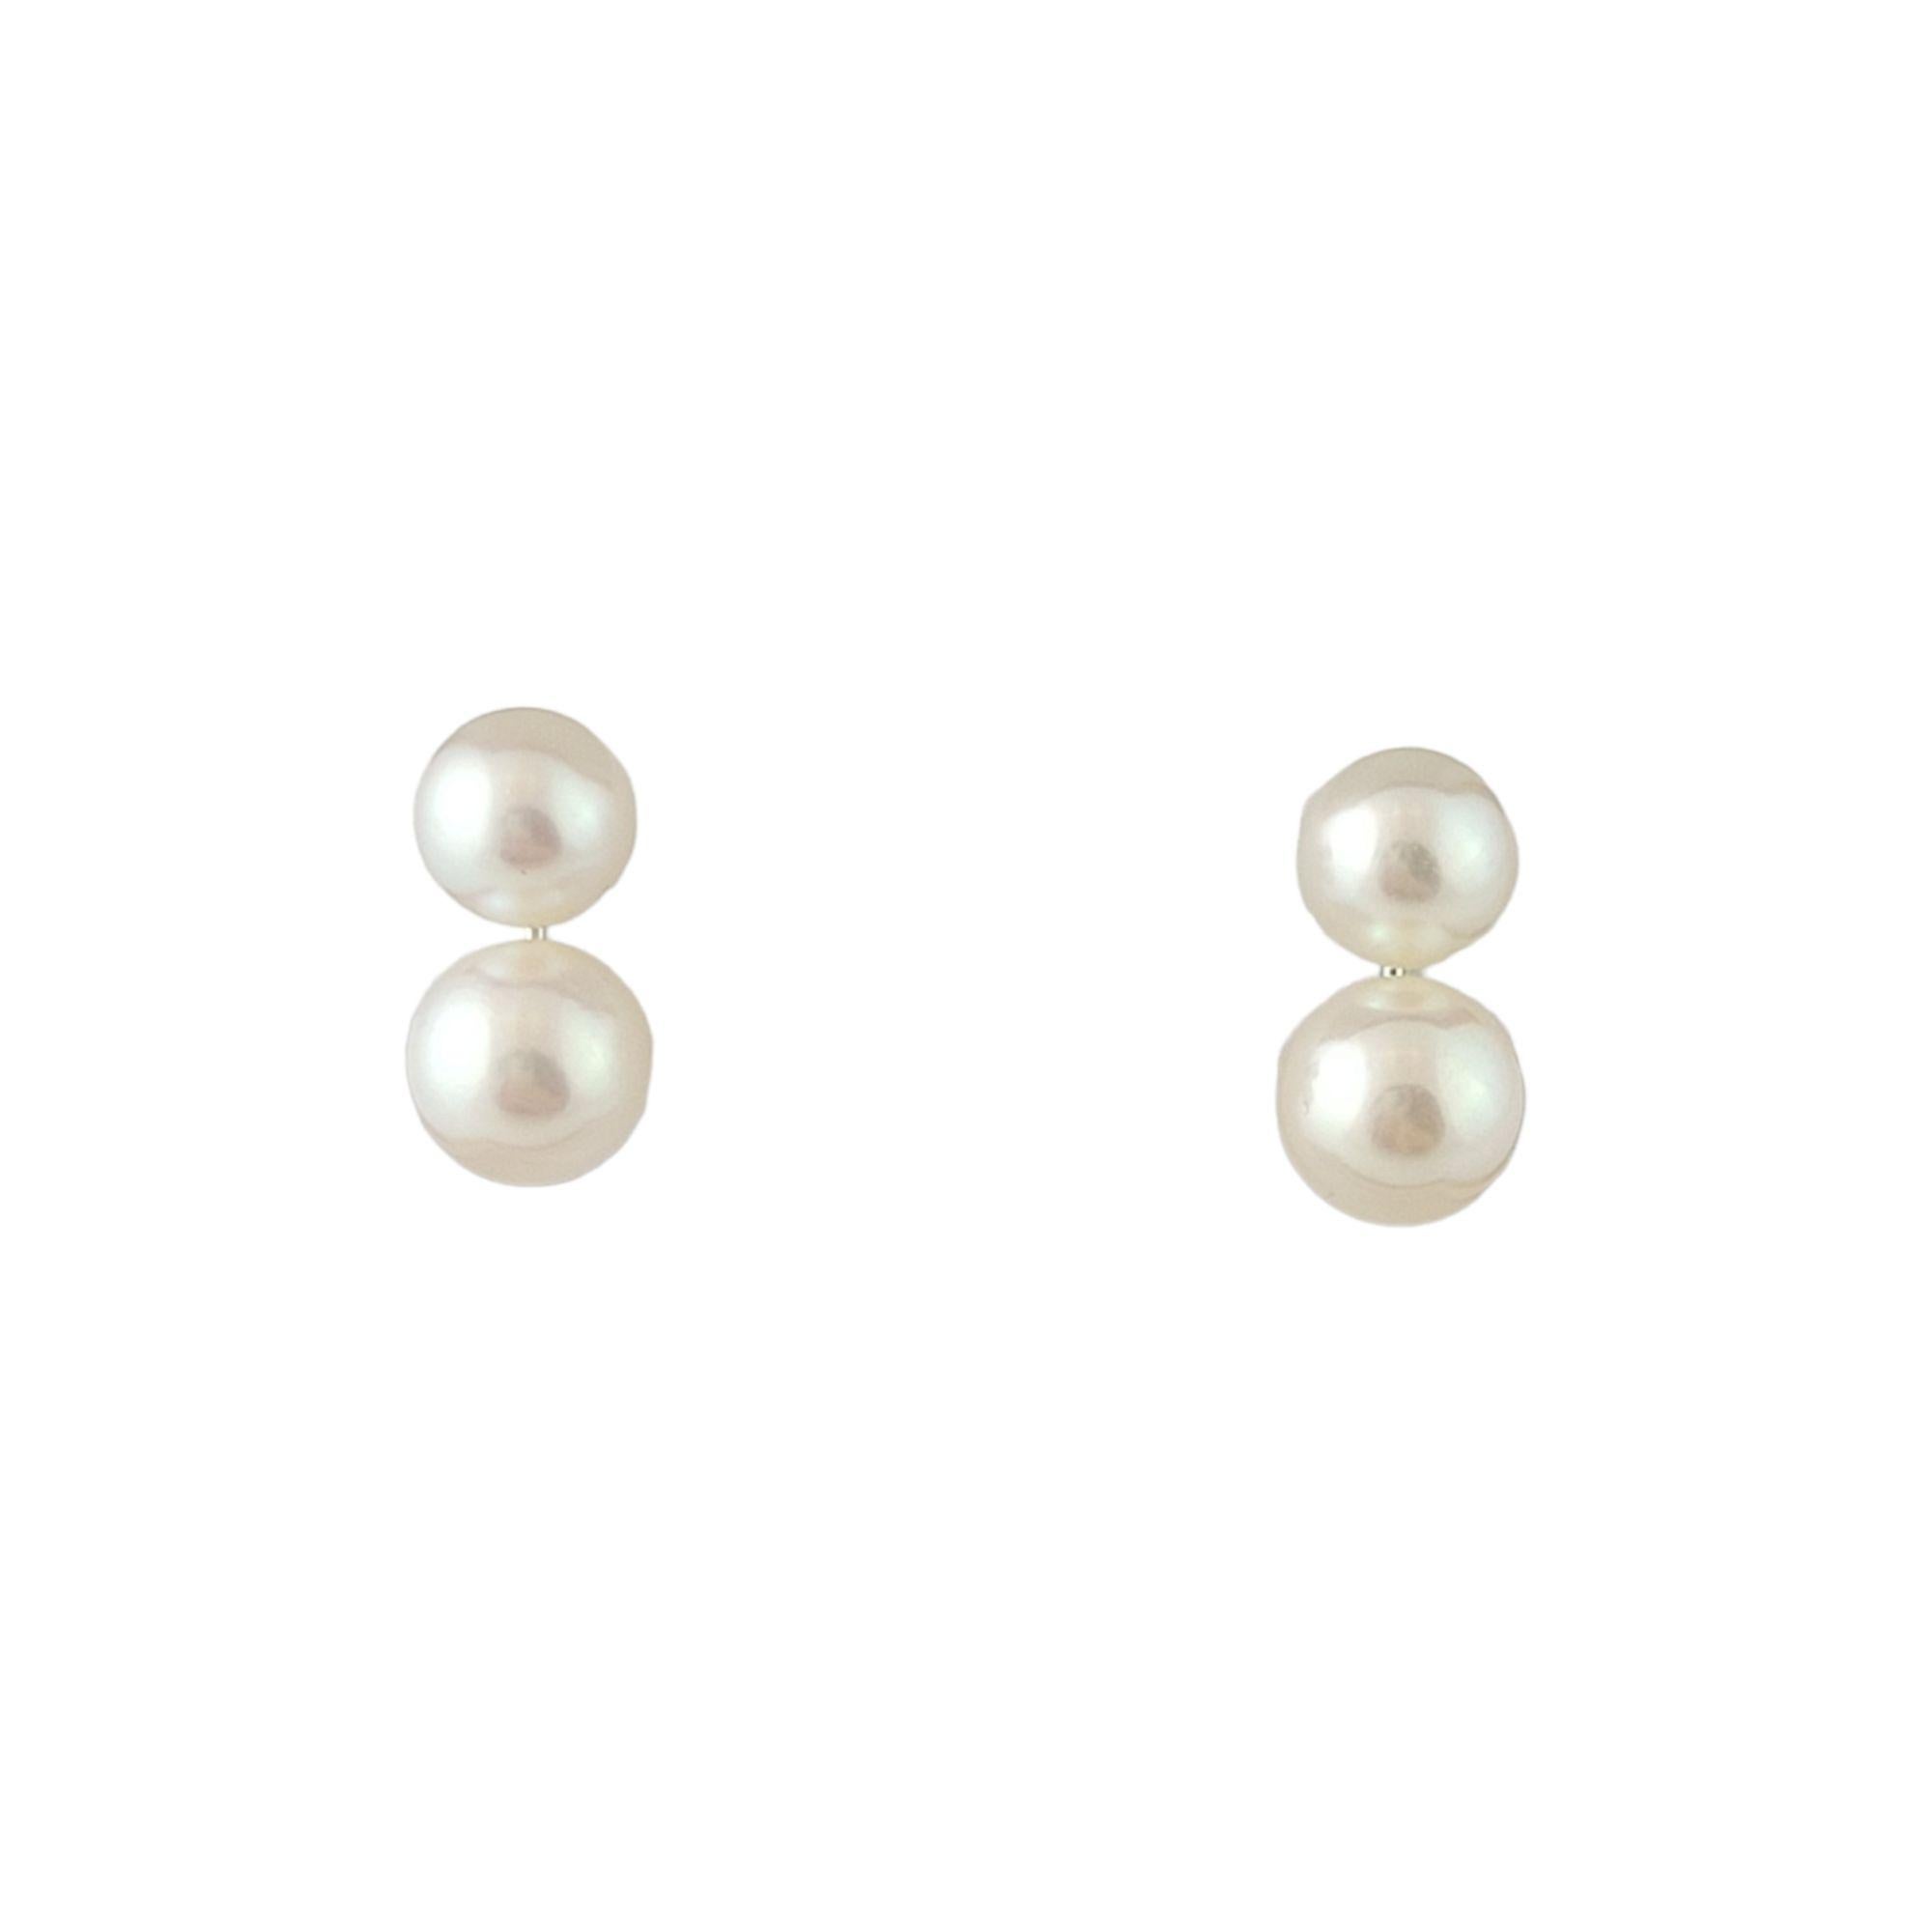 Vintage 14K White Gold Screw Back Double Pearl Earrings

Beautiful set of 14K white gold screw back earrings with 2 gorgeous pearls on each earring (4 total)!

Large pearls: 9mm
Small pearls: 7mm

Weight: 3.7 g/ 2.3 dwt

Hallmark: 14Kt

Very good